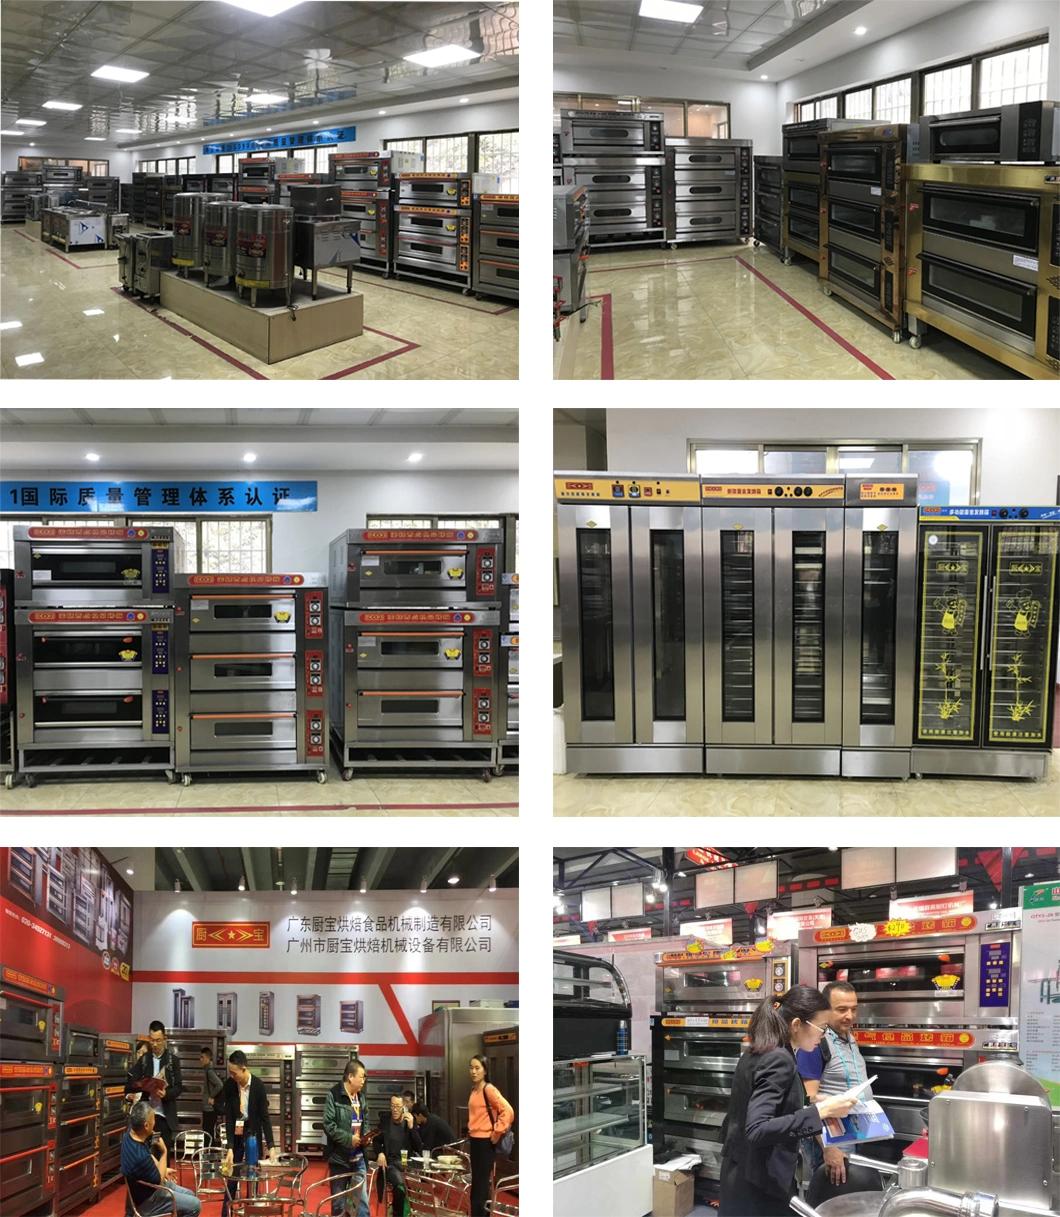 2 Deck 4 Trays Electric Oven for Commercial Restaurant Kitchen Baking Equipment Food Machine Bakery Machinery